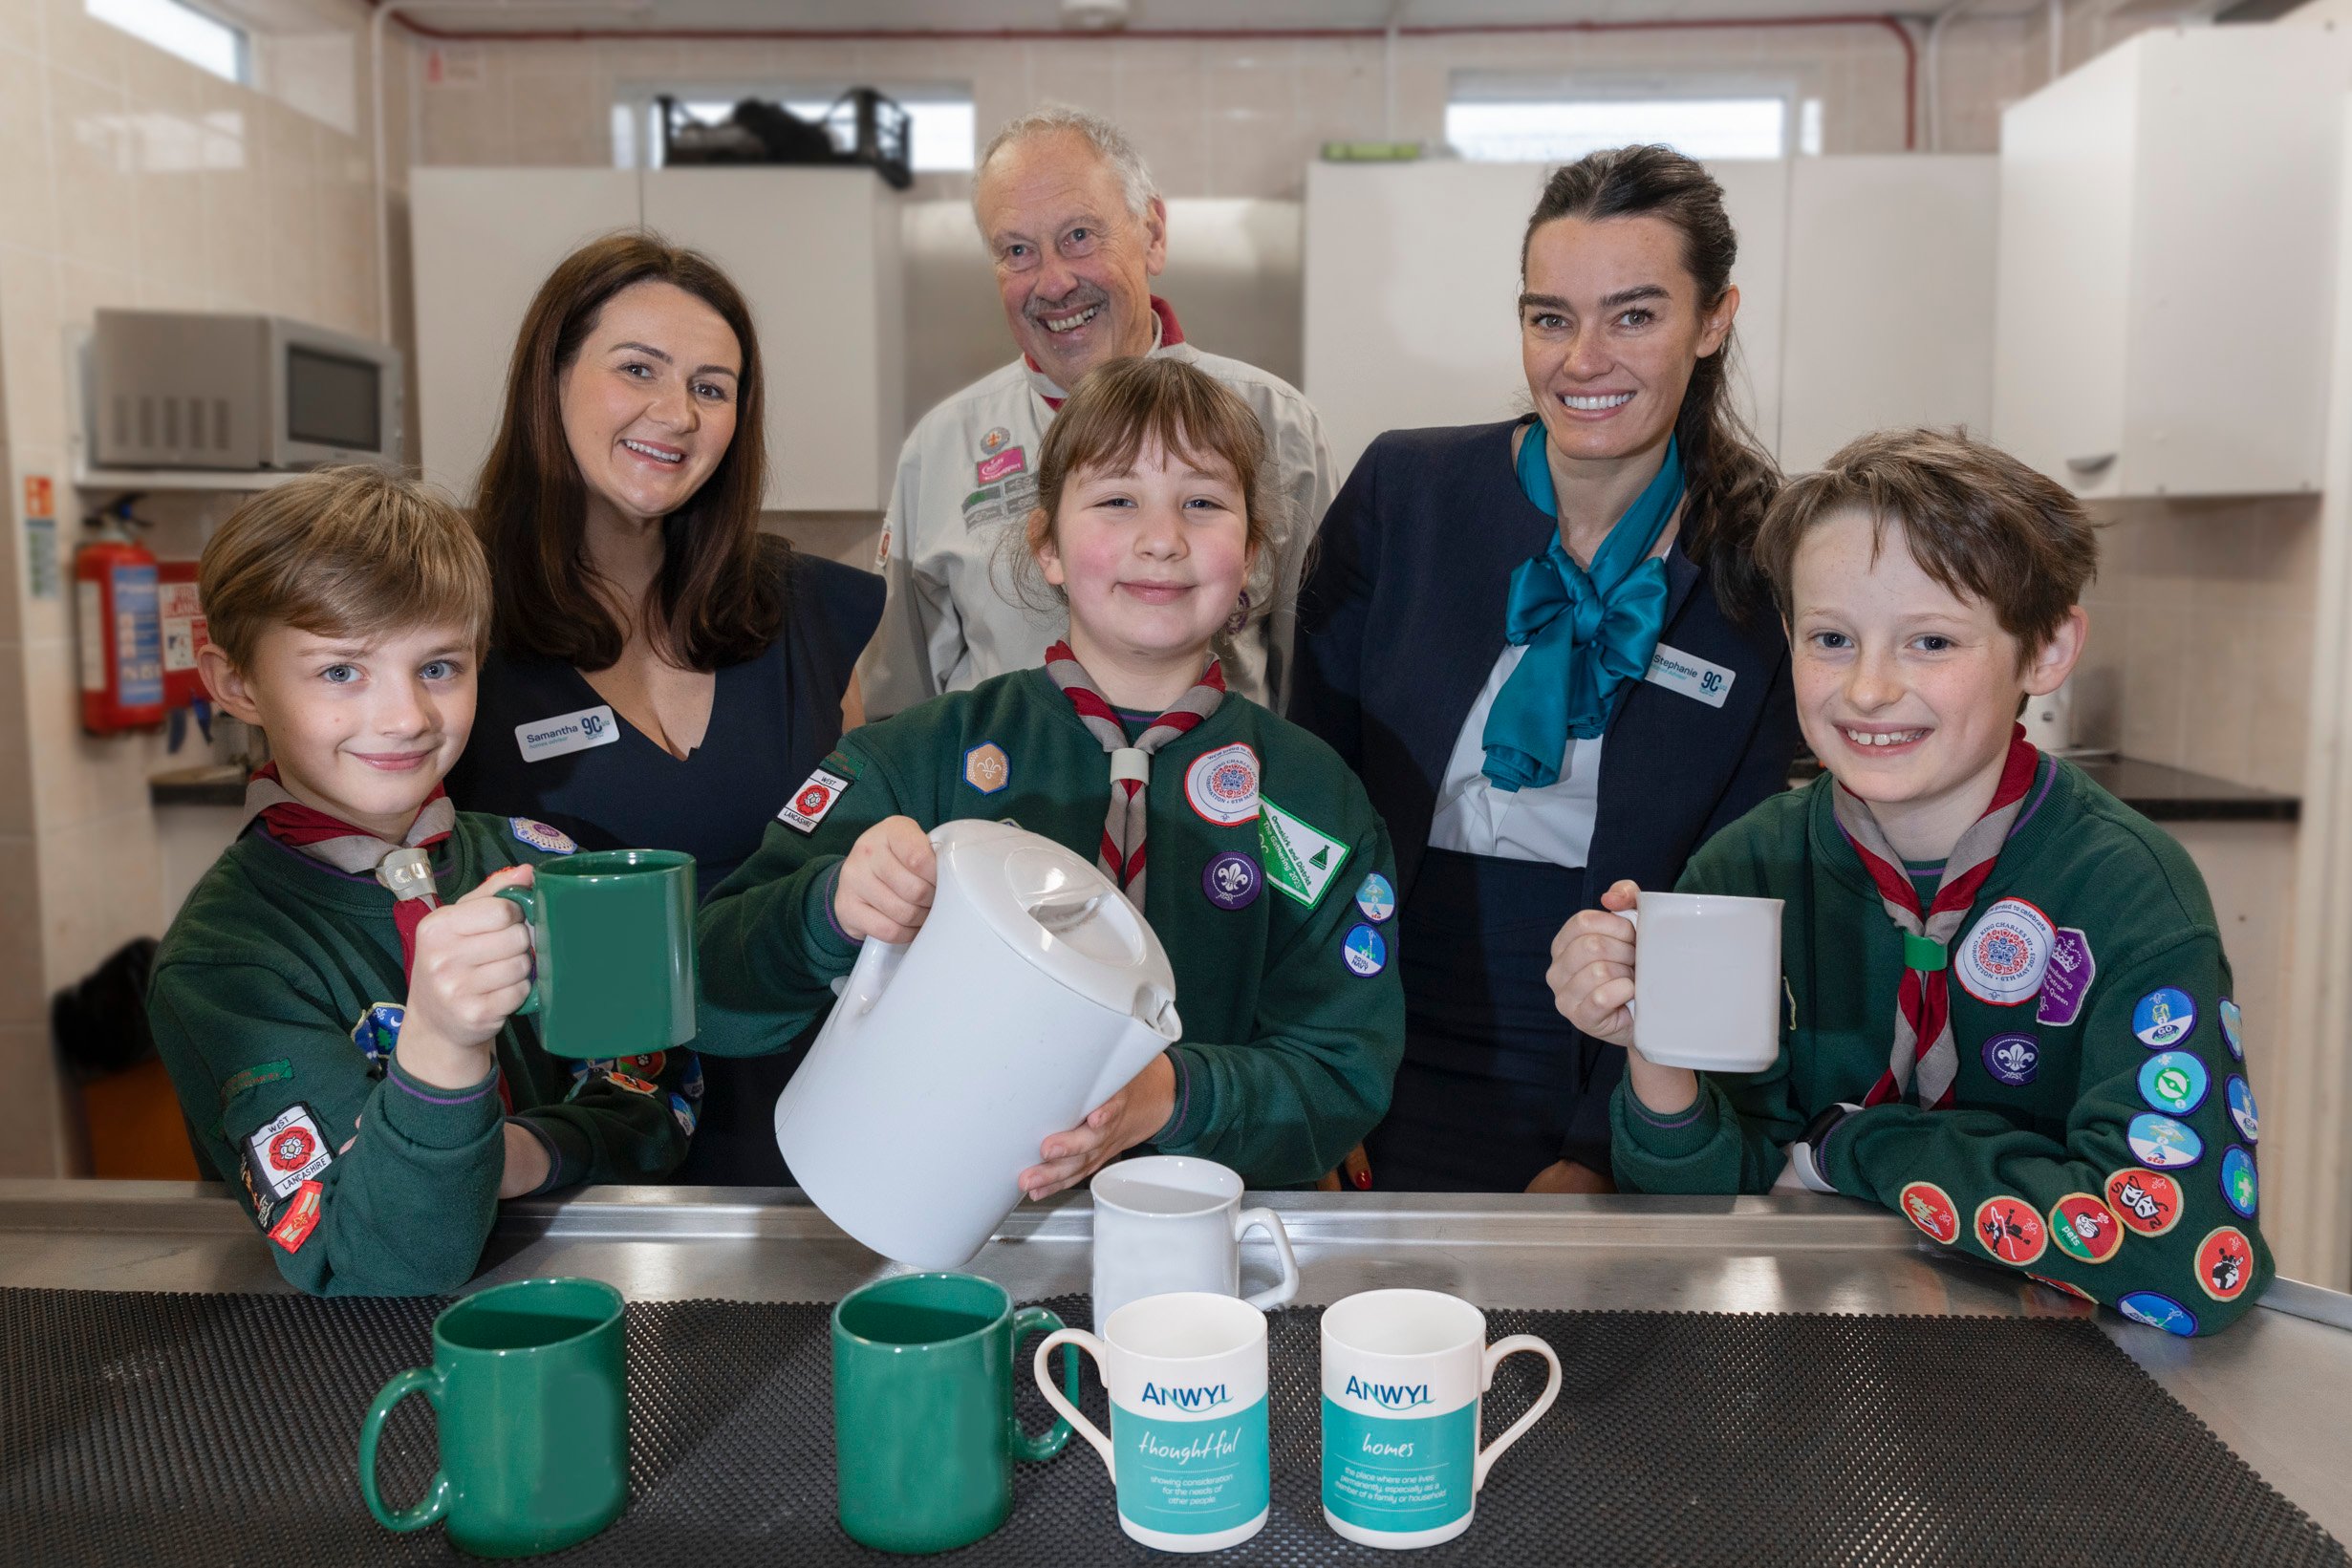 1.	Anwyl’s Samantha France and Stephanie Tam visit 29th Ormskirk Burscough St Johns Scout Group to see how Love From Anwyl funding has been used. They’re pictured with Group chairman Chris Nevill, Eleanor, Benjamin, Isobelle and Elliott.